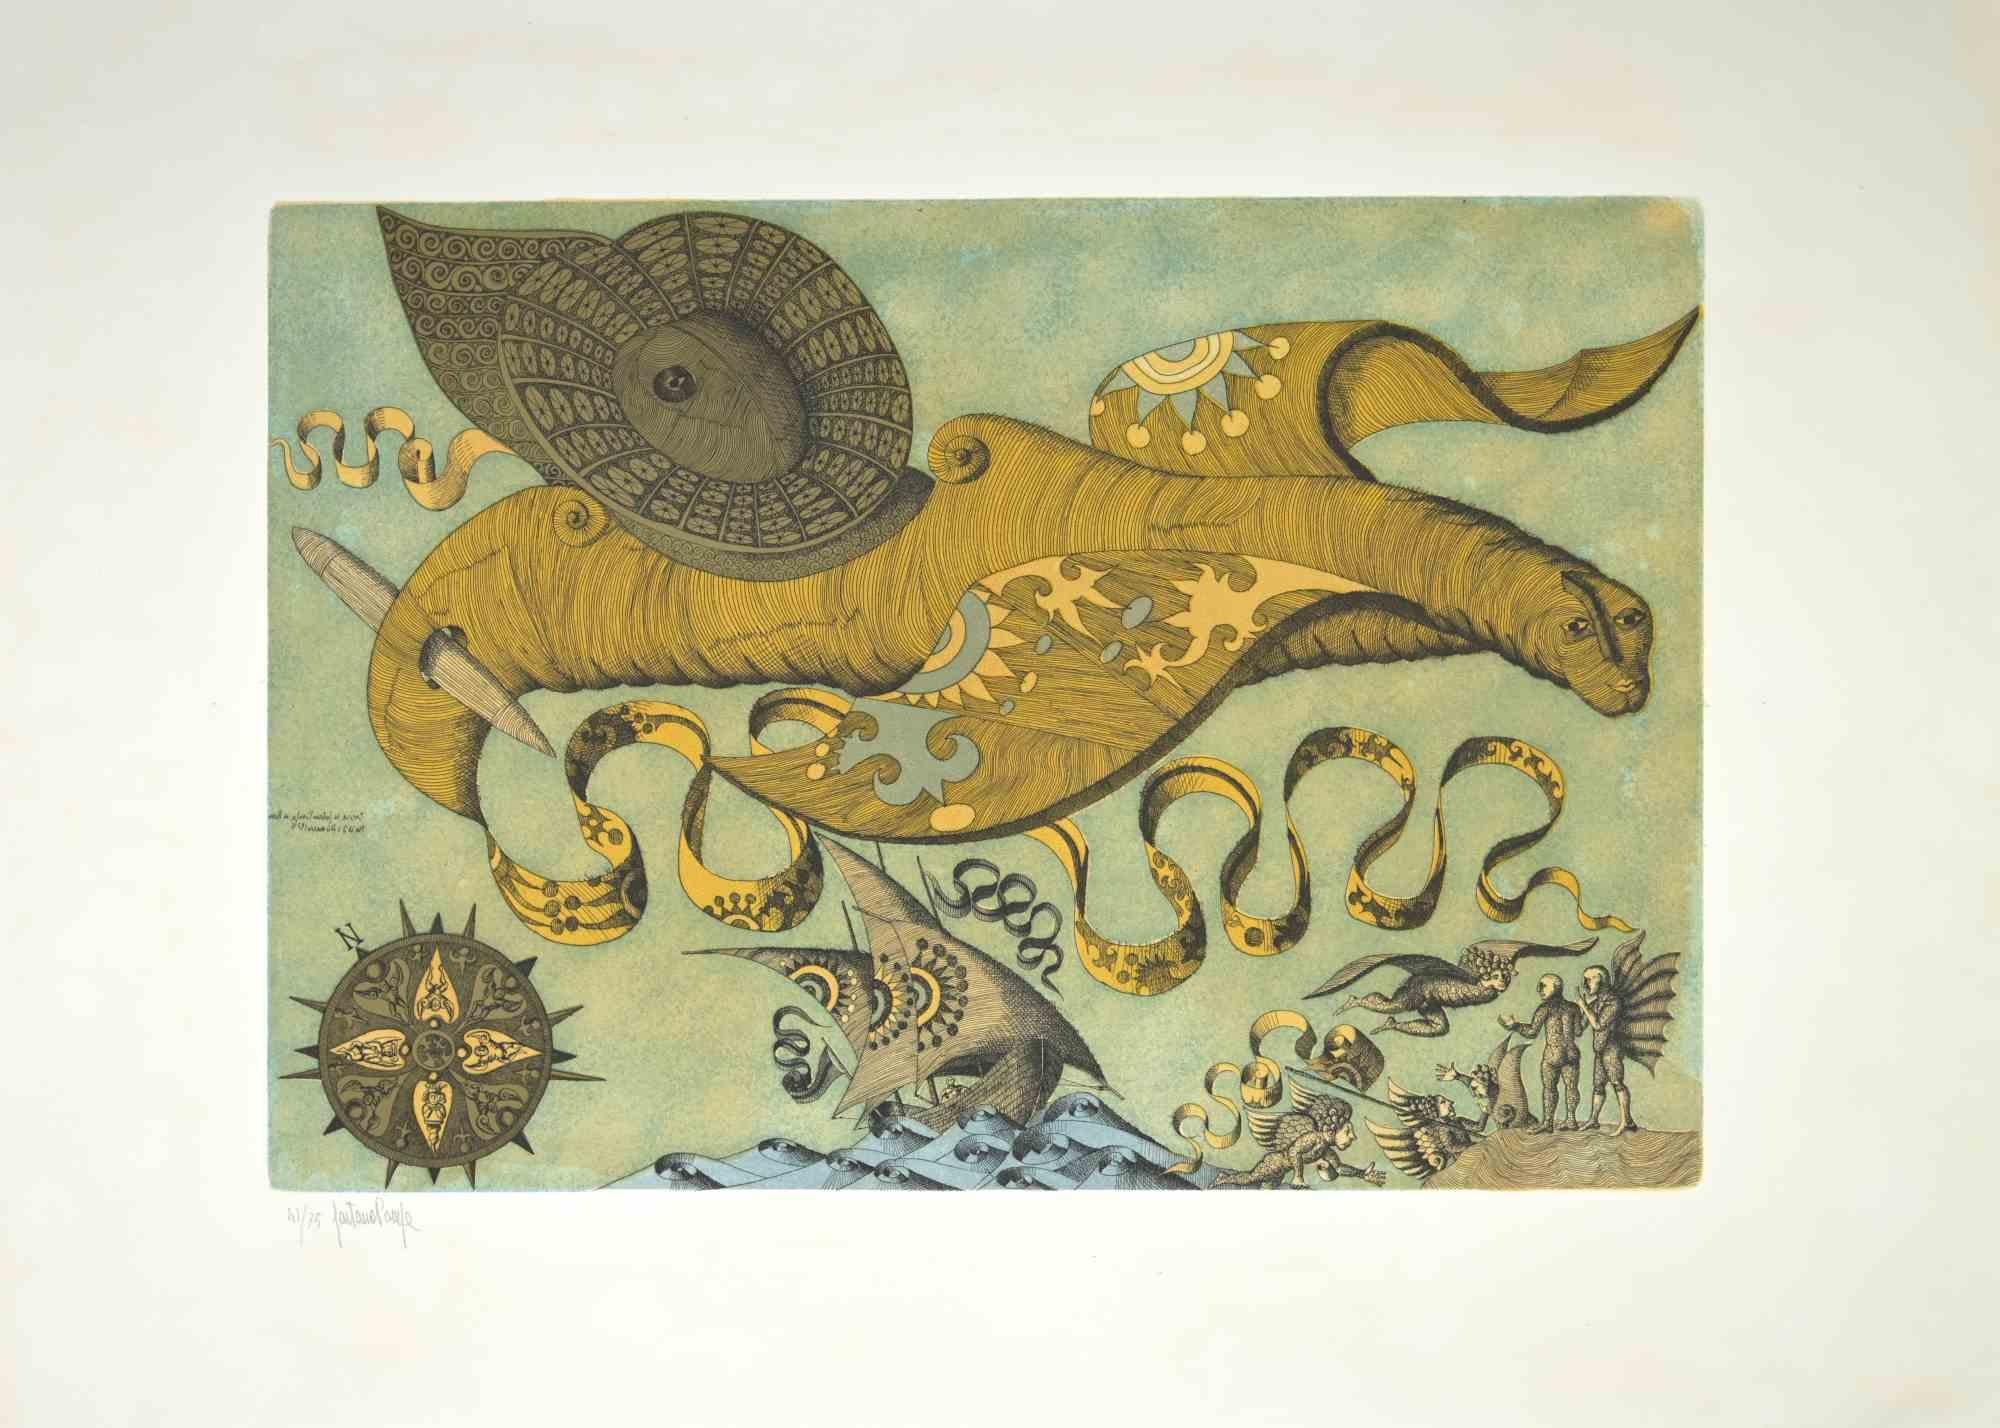 The Imaginary Animal -  Etching by Gaetano Pompa - 1970s